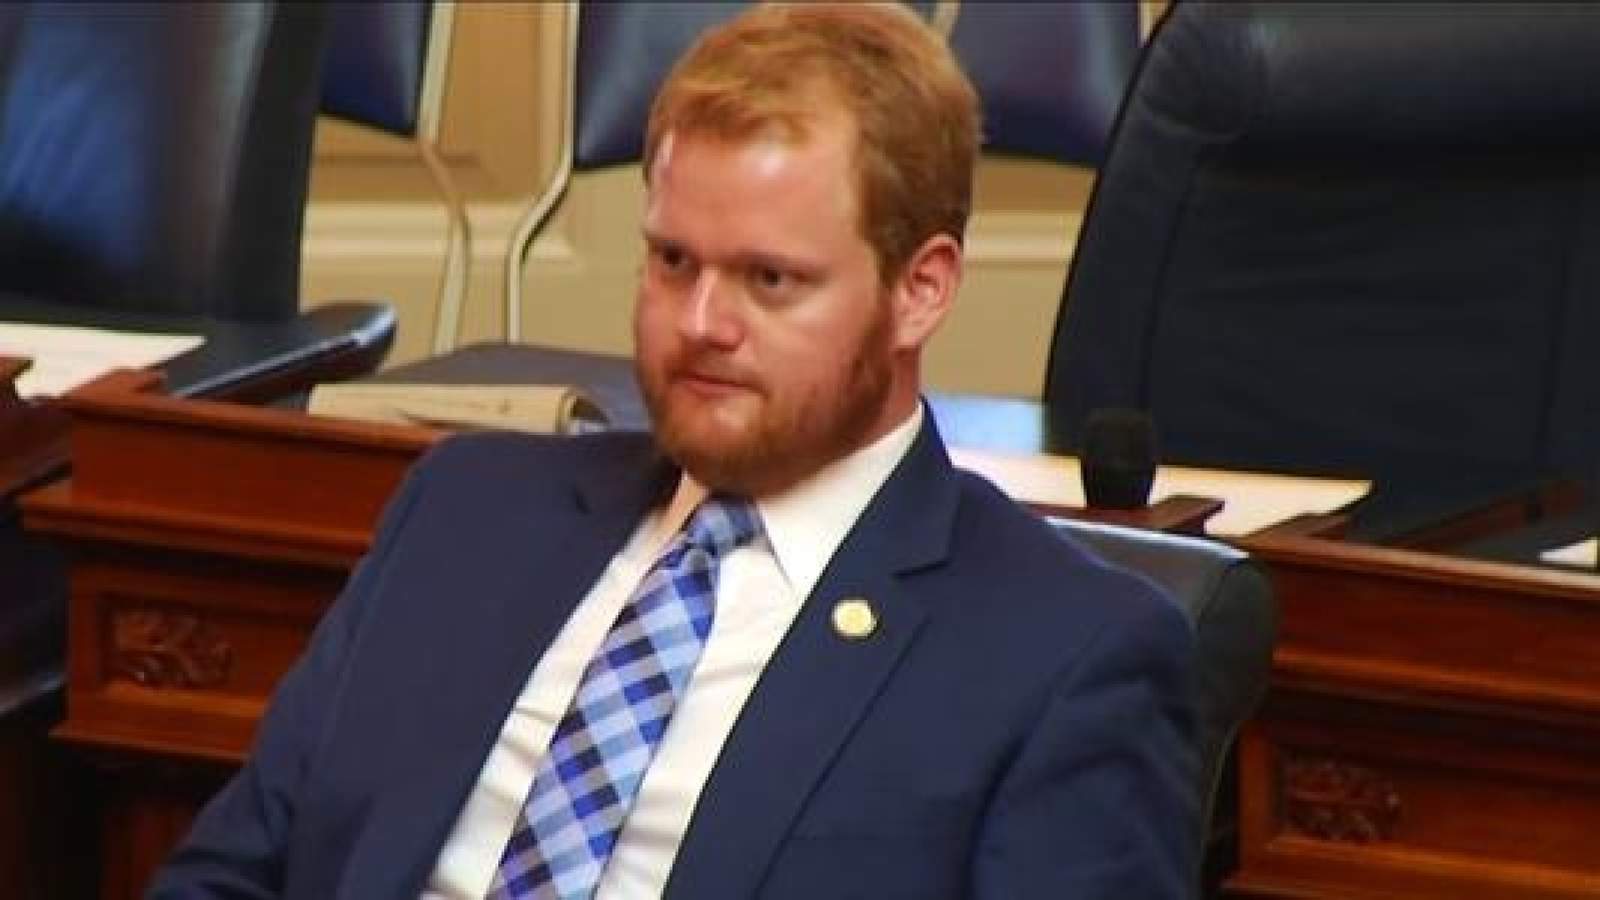 'I am not above the law’: Del. Chris Hurst releases expanded statement after blowing .085 during traffic stop